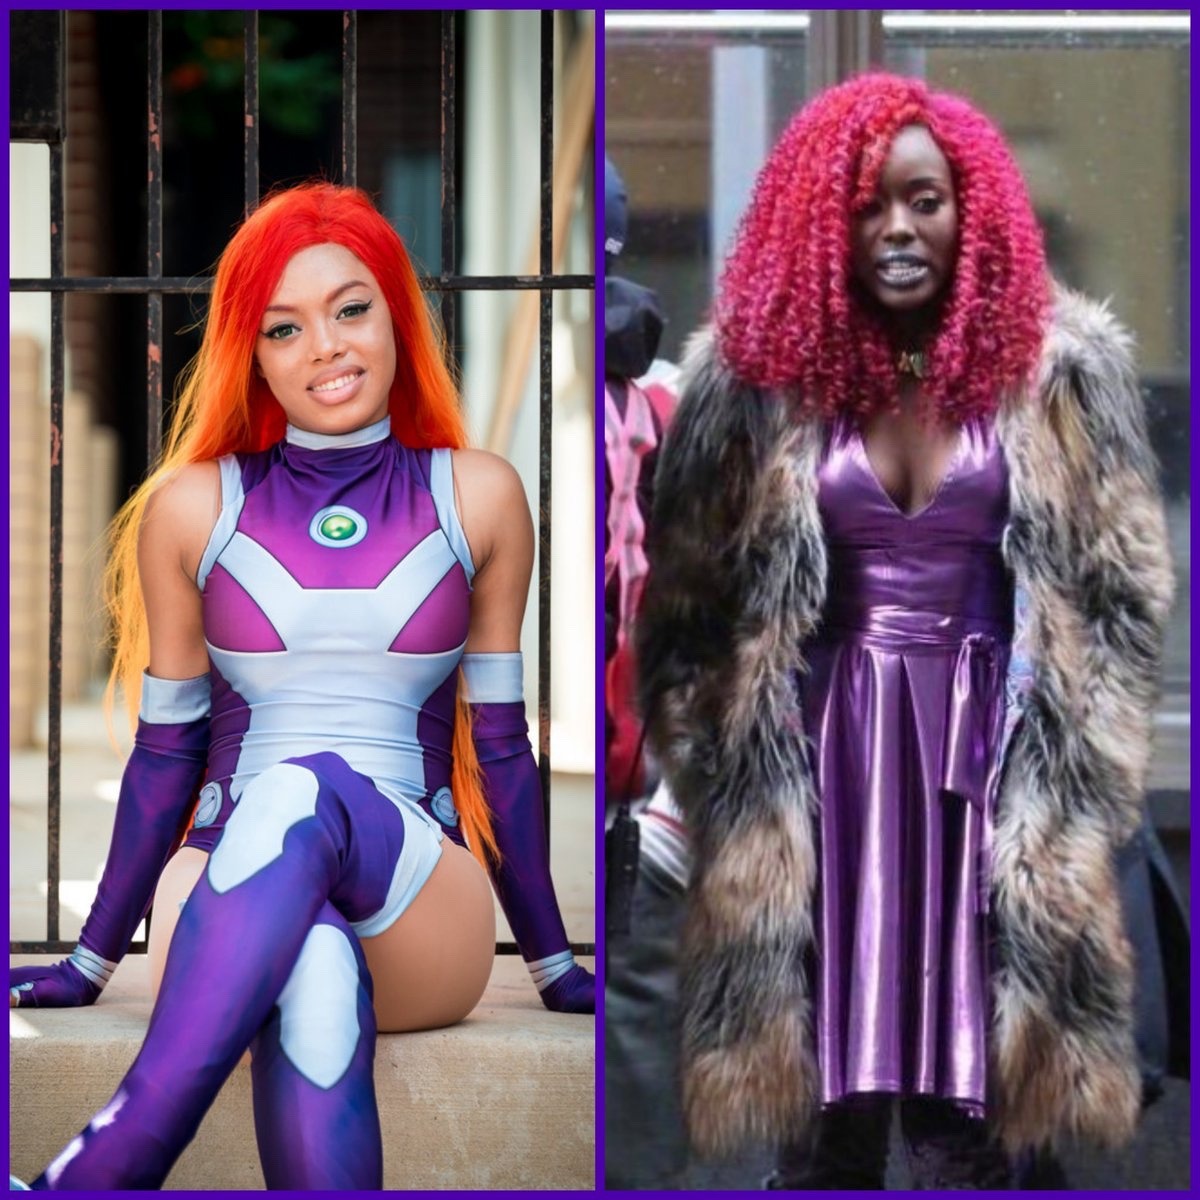 trilllizard666: my-little-ninja:  royalhans:   theultimatecomicmovielover:   Starfire’s wig is TRASH I’m sorry I’ve seen better cosplays by black women   this whole movie looks like trash. in other words, save your money and stay at home   It’s